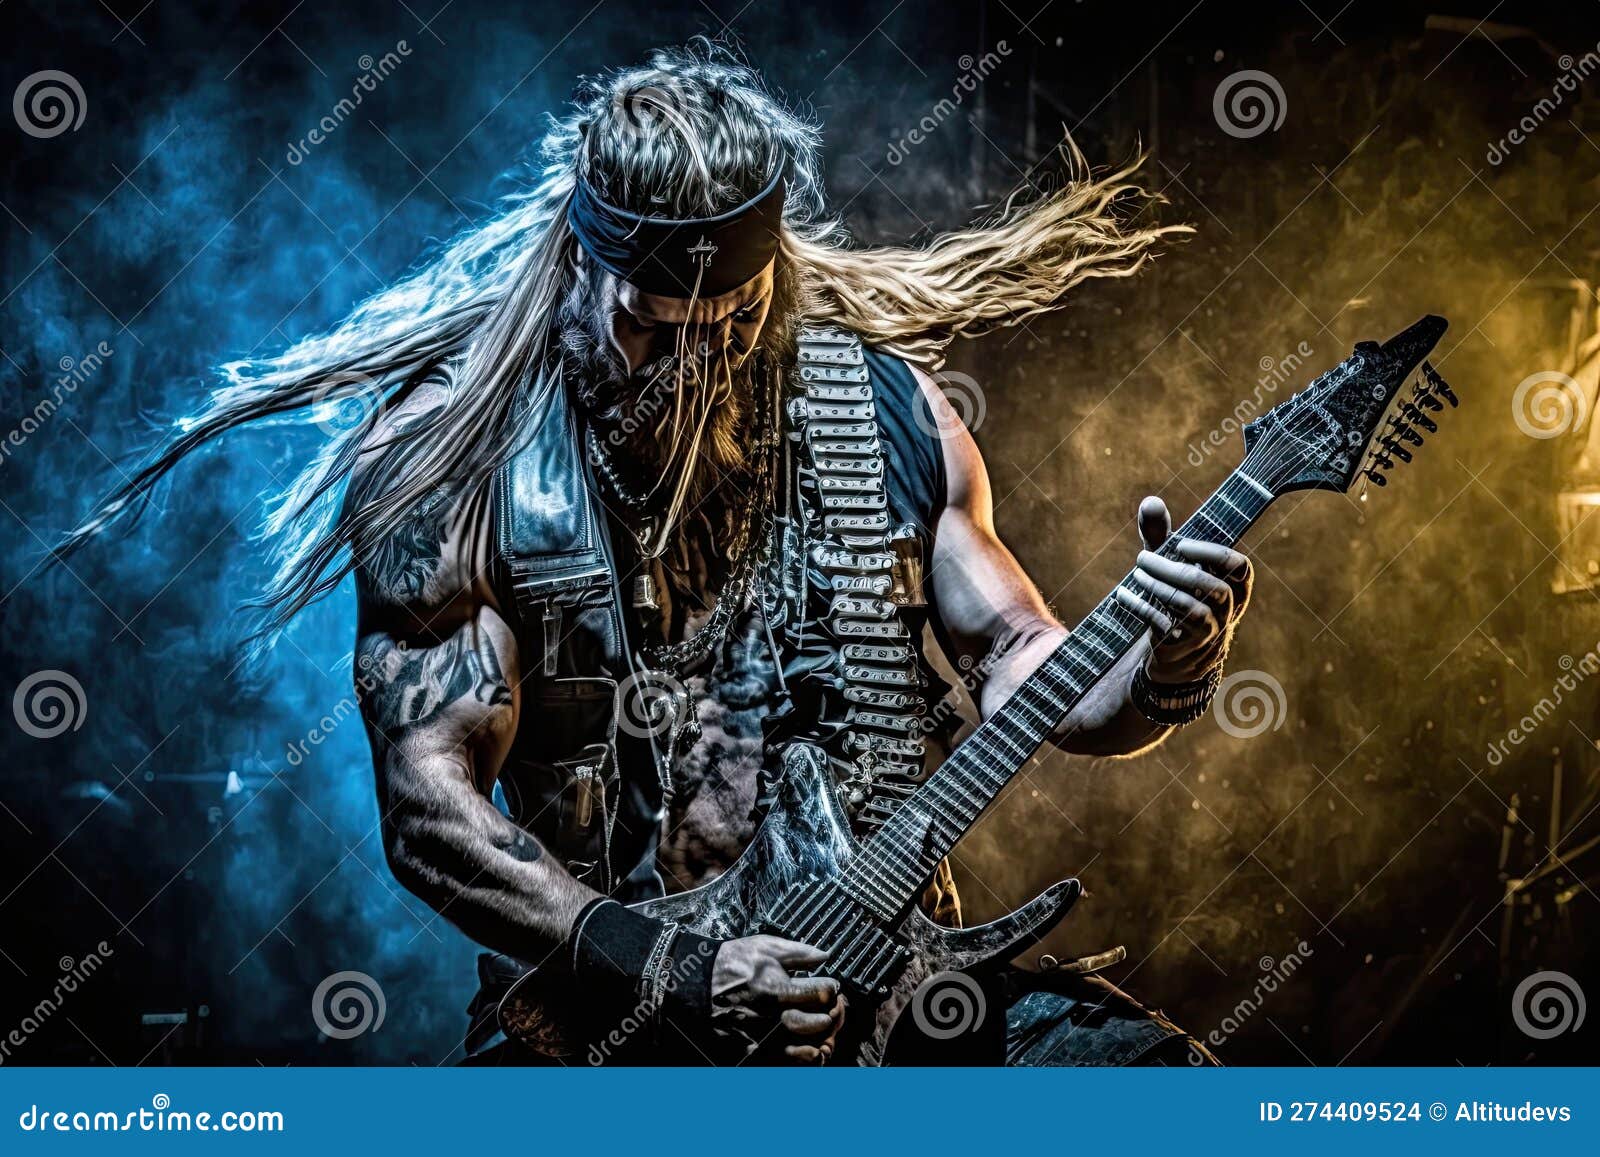 Heavy Metal Guitarist, with Their Instrument and Gear in the Background,  Performing Live Stock Illustration - Illustration of guitar, generated:  274409524